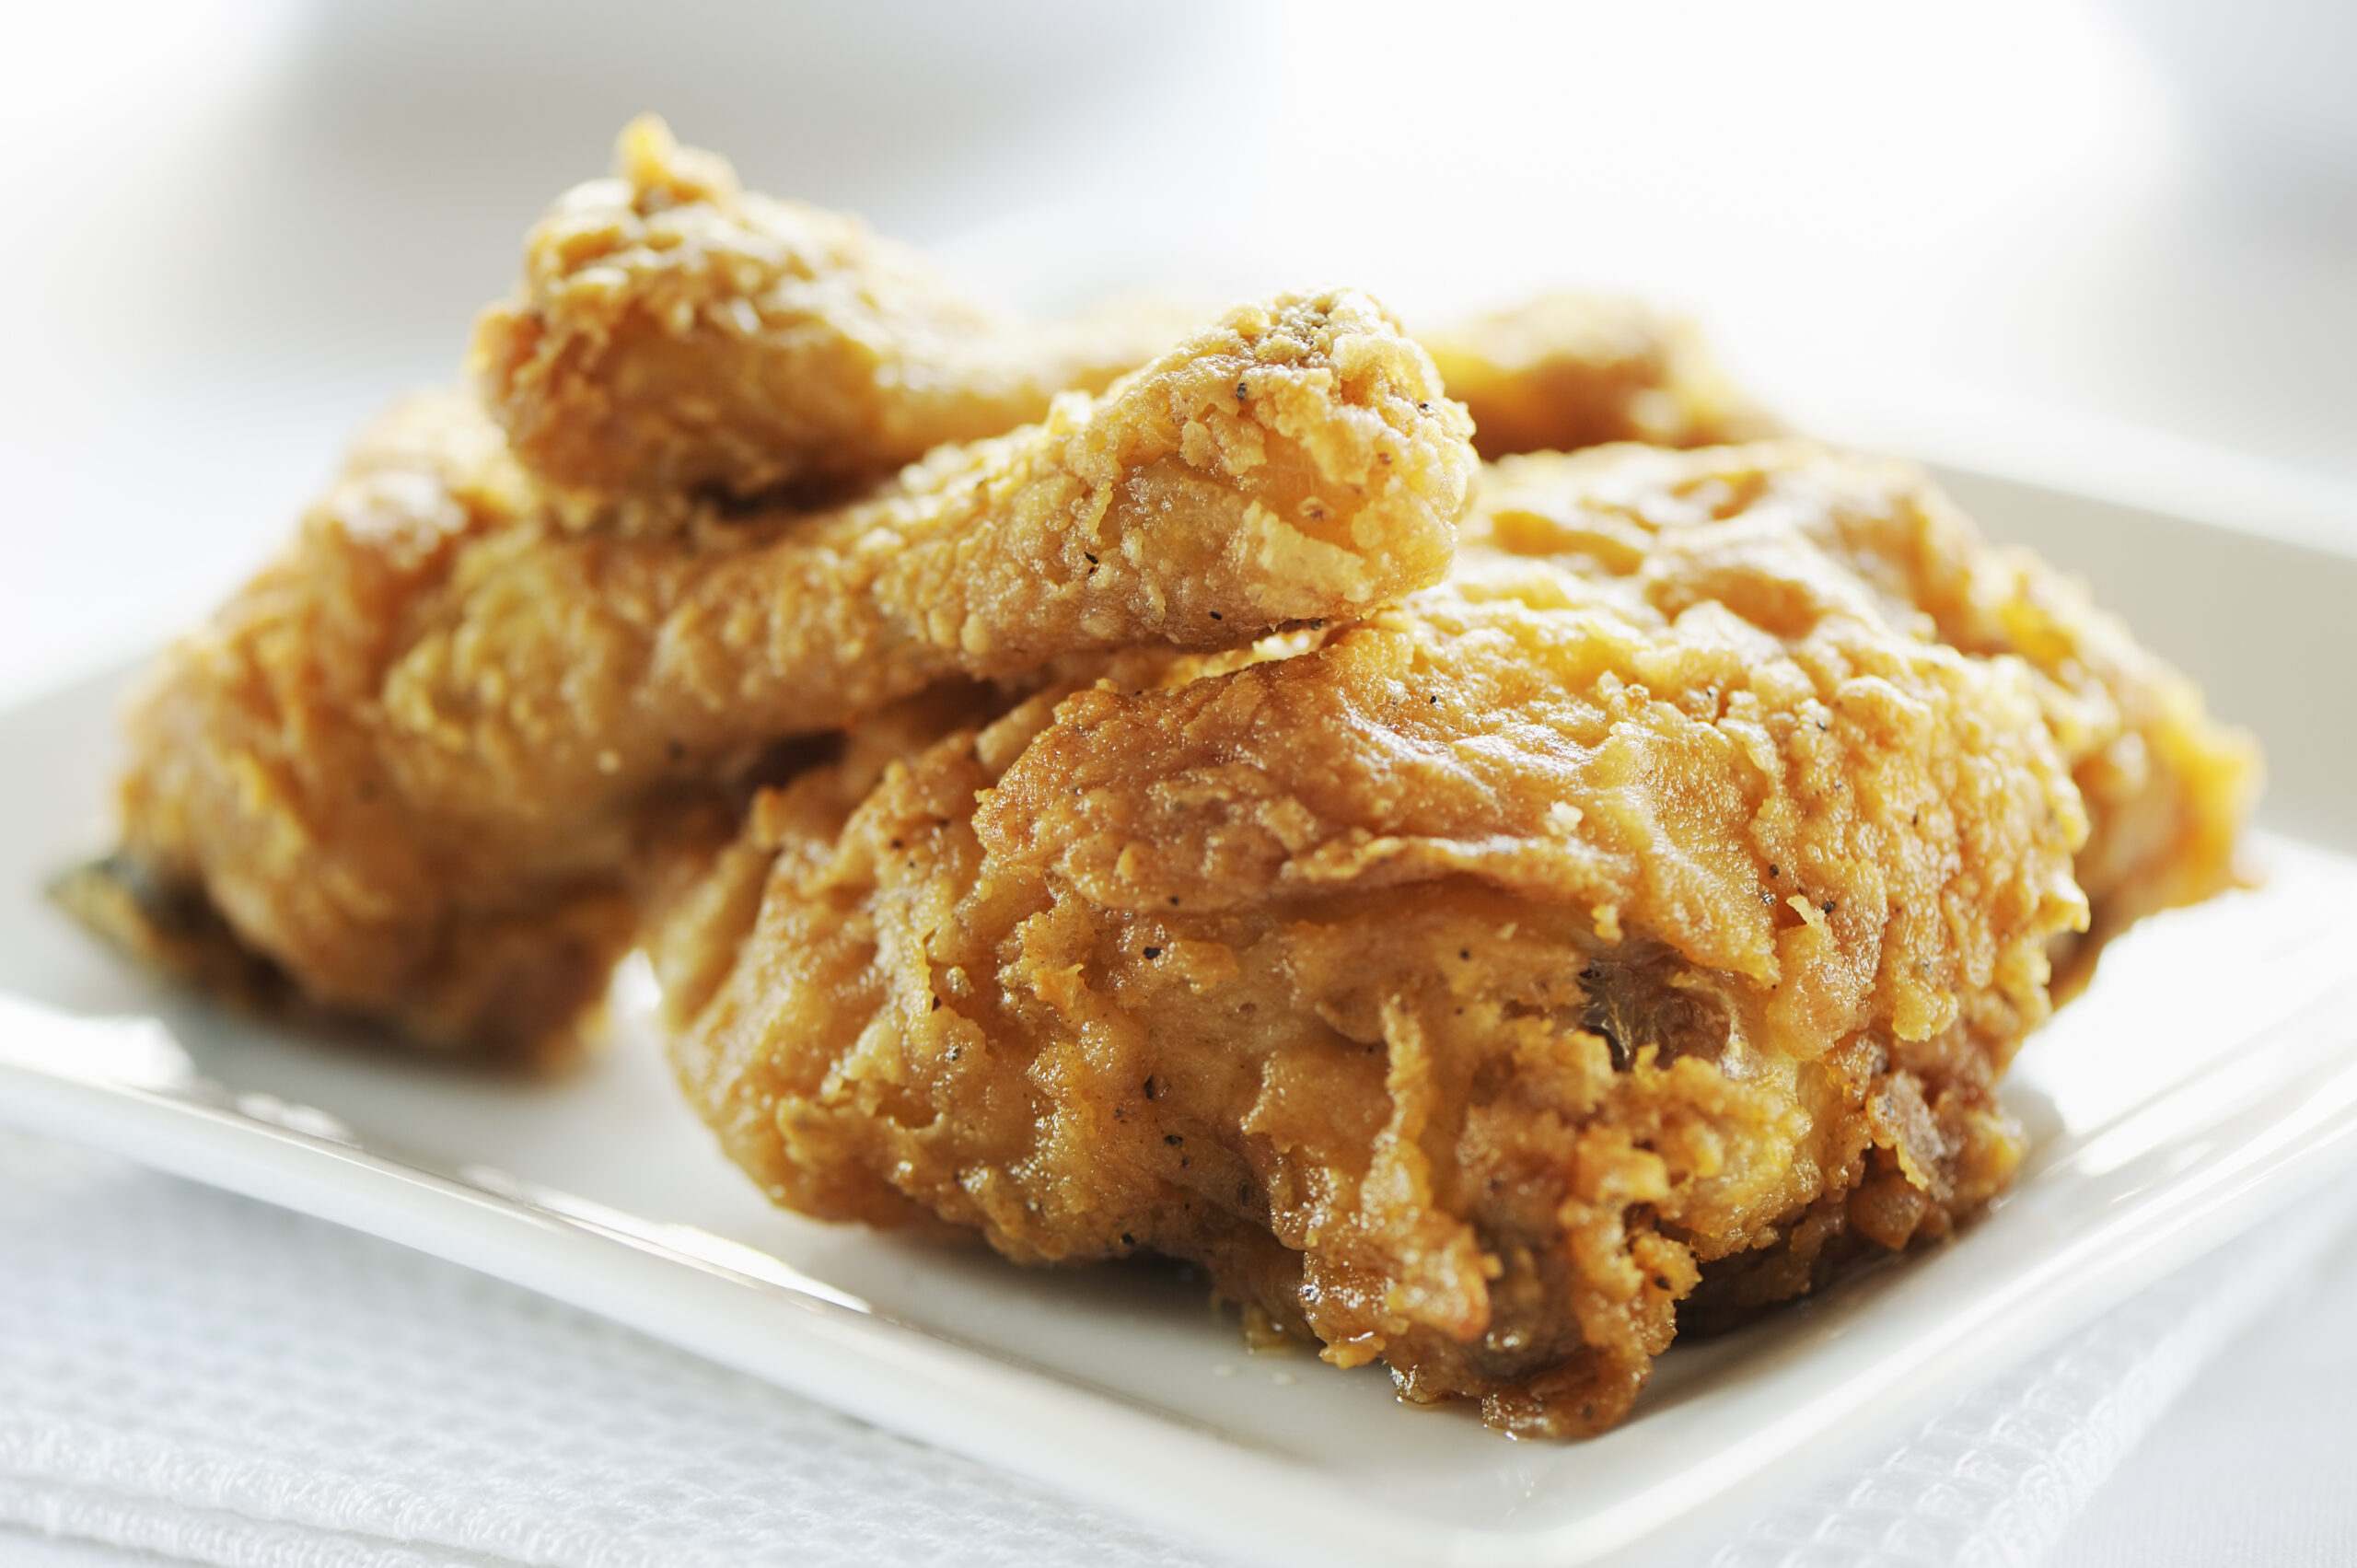 Plate of crispy fried chicken on a white background. More fried chicken below...